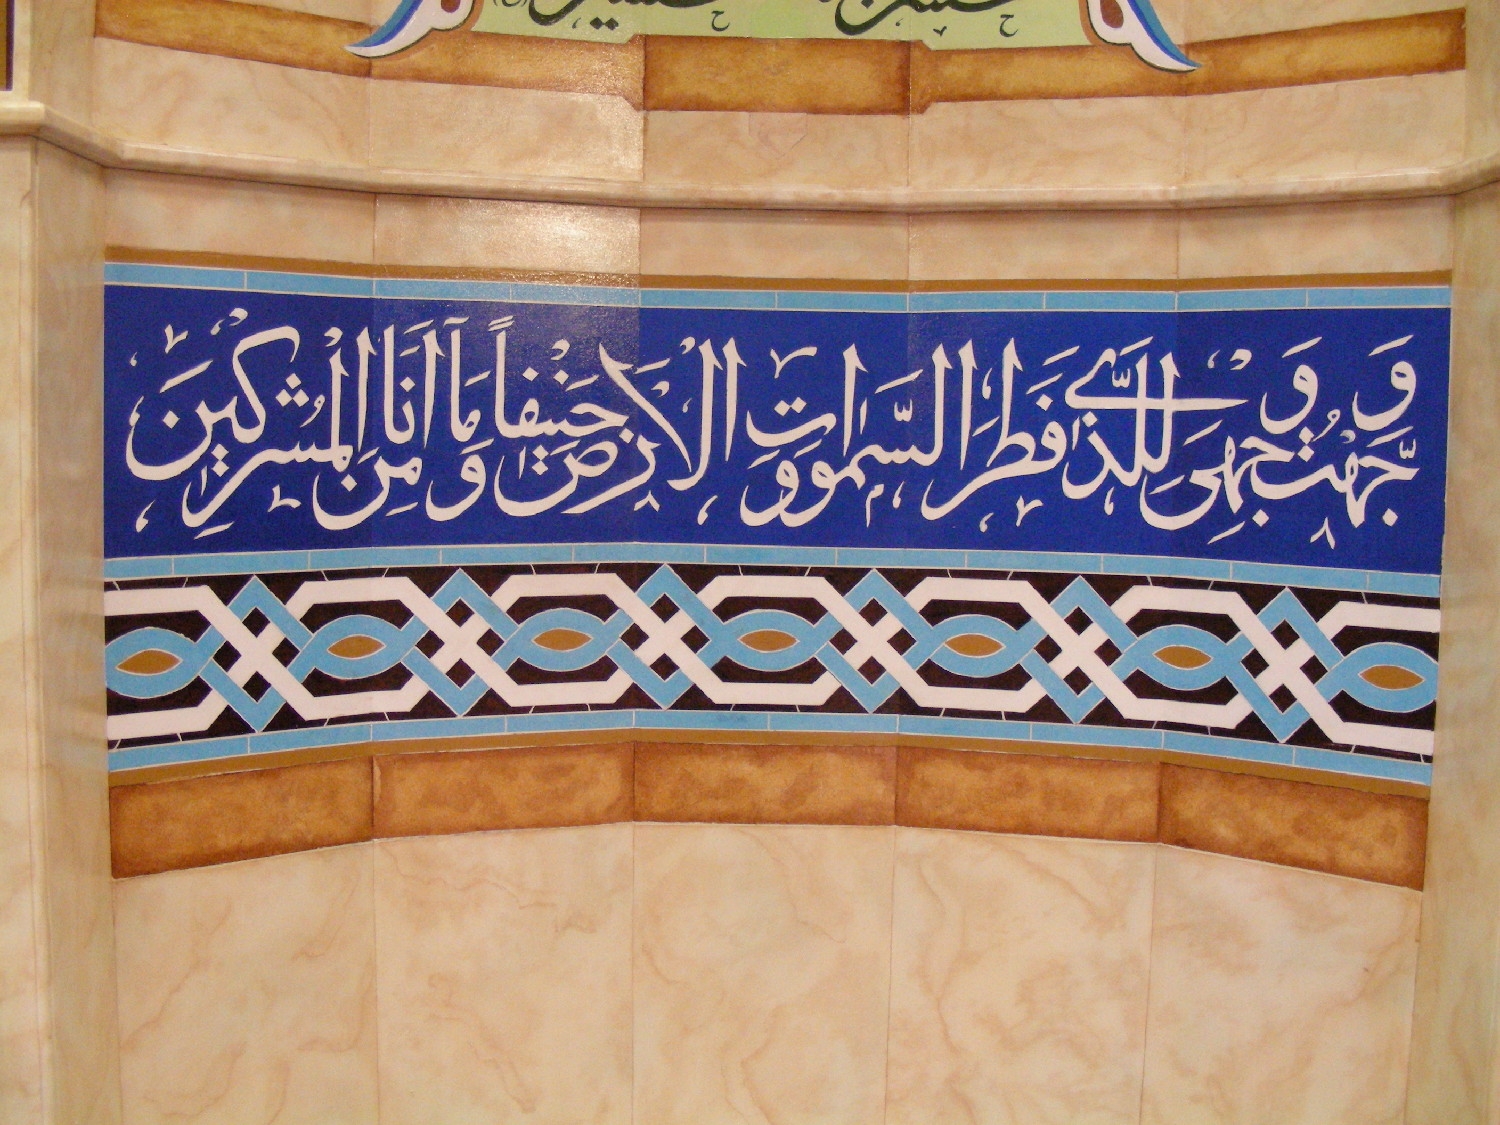 Mihrab, detail of bands of calligraphic and patterned tile